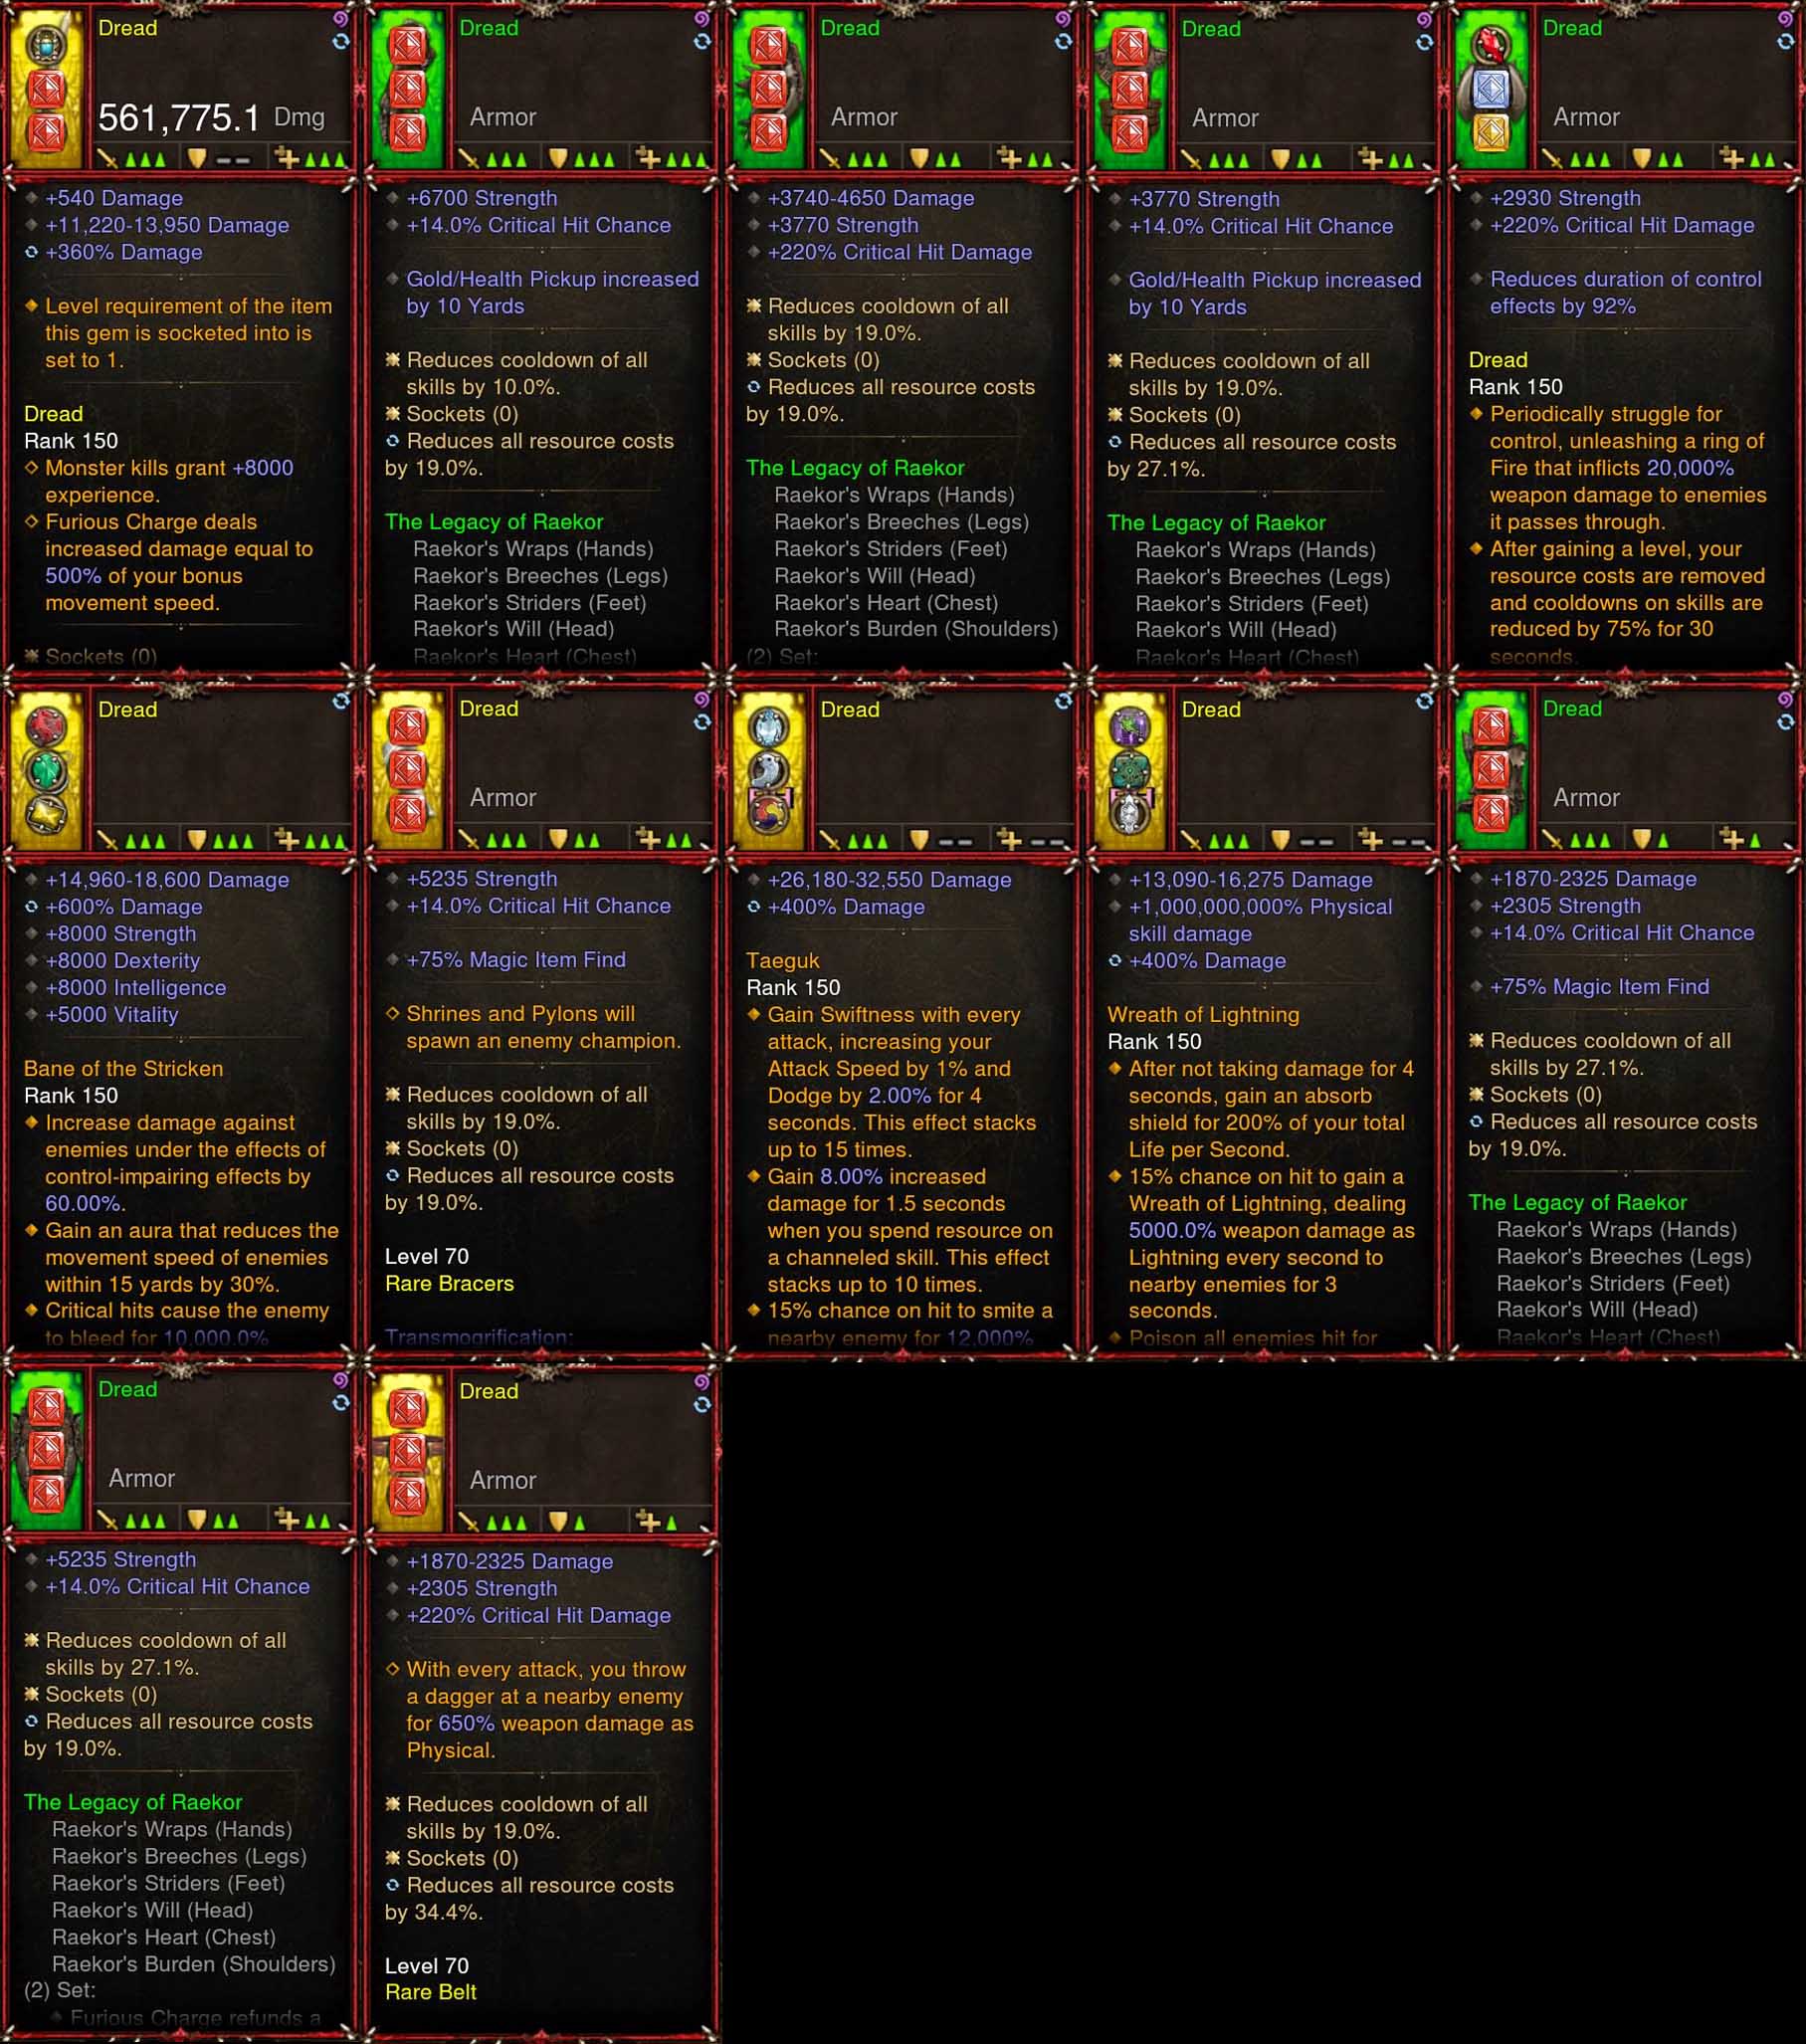 [Primal Ancient] [Quad DPS] [LIMITED] Diablo 3 IMv5 Raekor Barbarian Set Dread W2 Diablo 3 Mods ROS Seasonal and Non Seasonal Save Mod - Modded Items and Gear - Hacks - Cheats - Trainers for Playstation 4 - Playstation 5 - Nintendo Switch - Xbox One